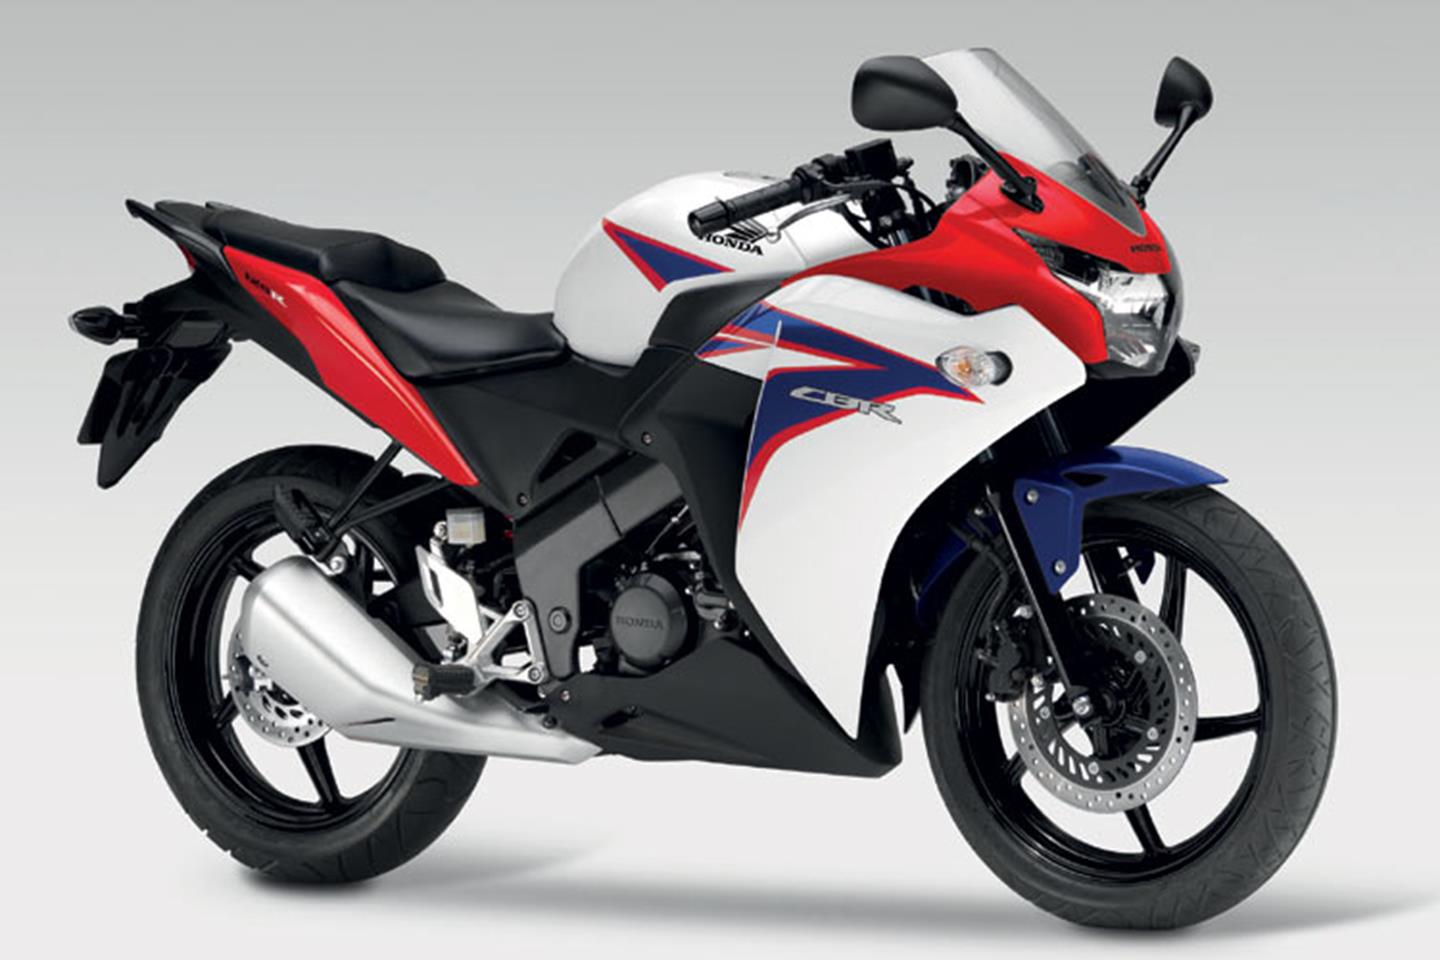 Honda CBR125R in red white and blue